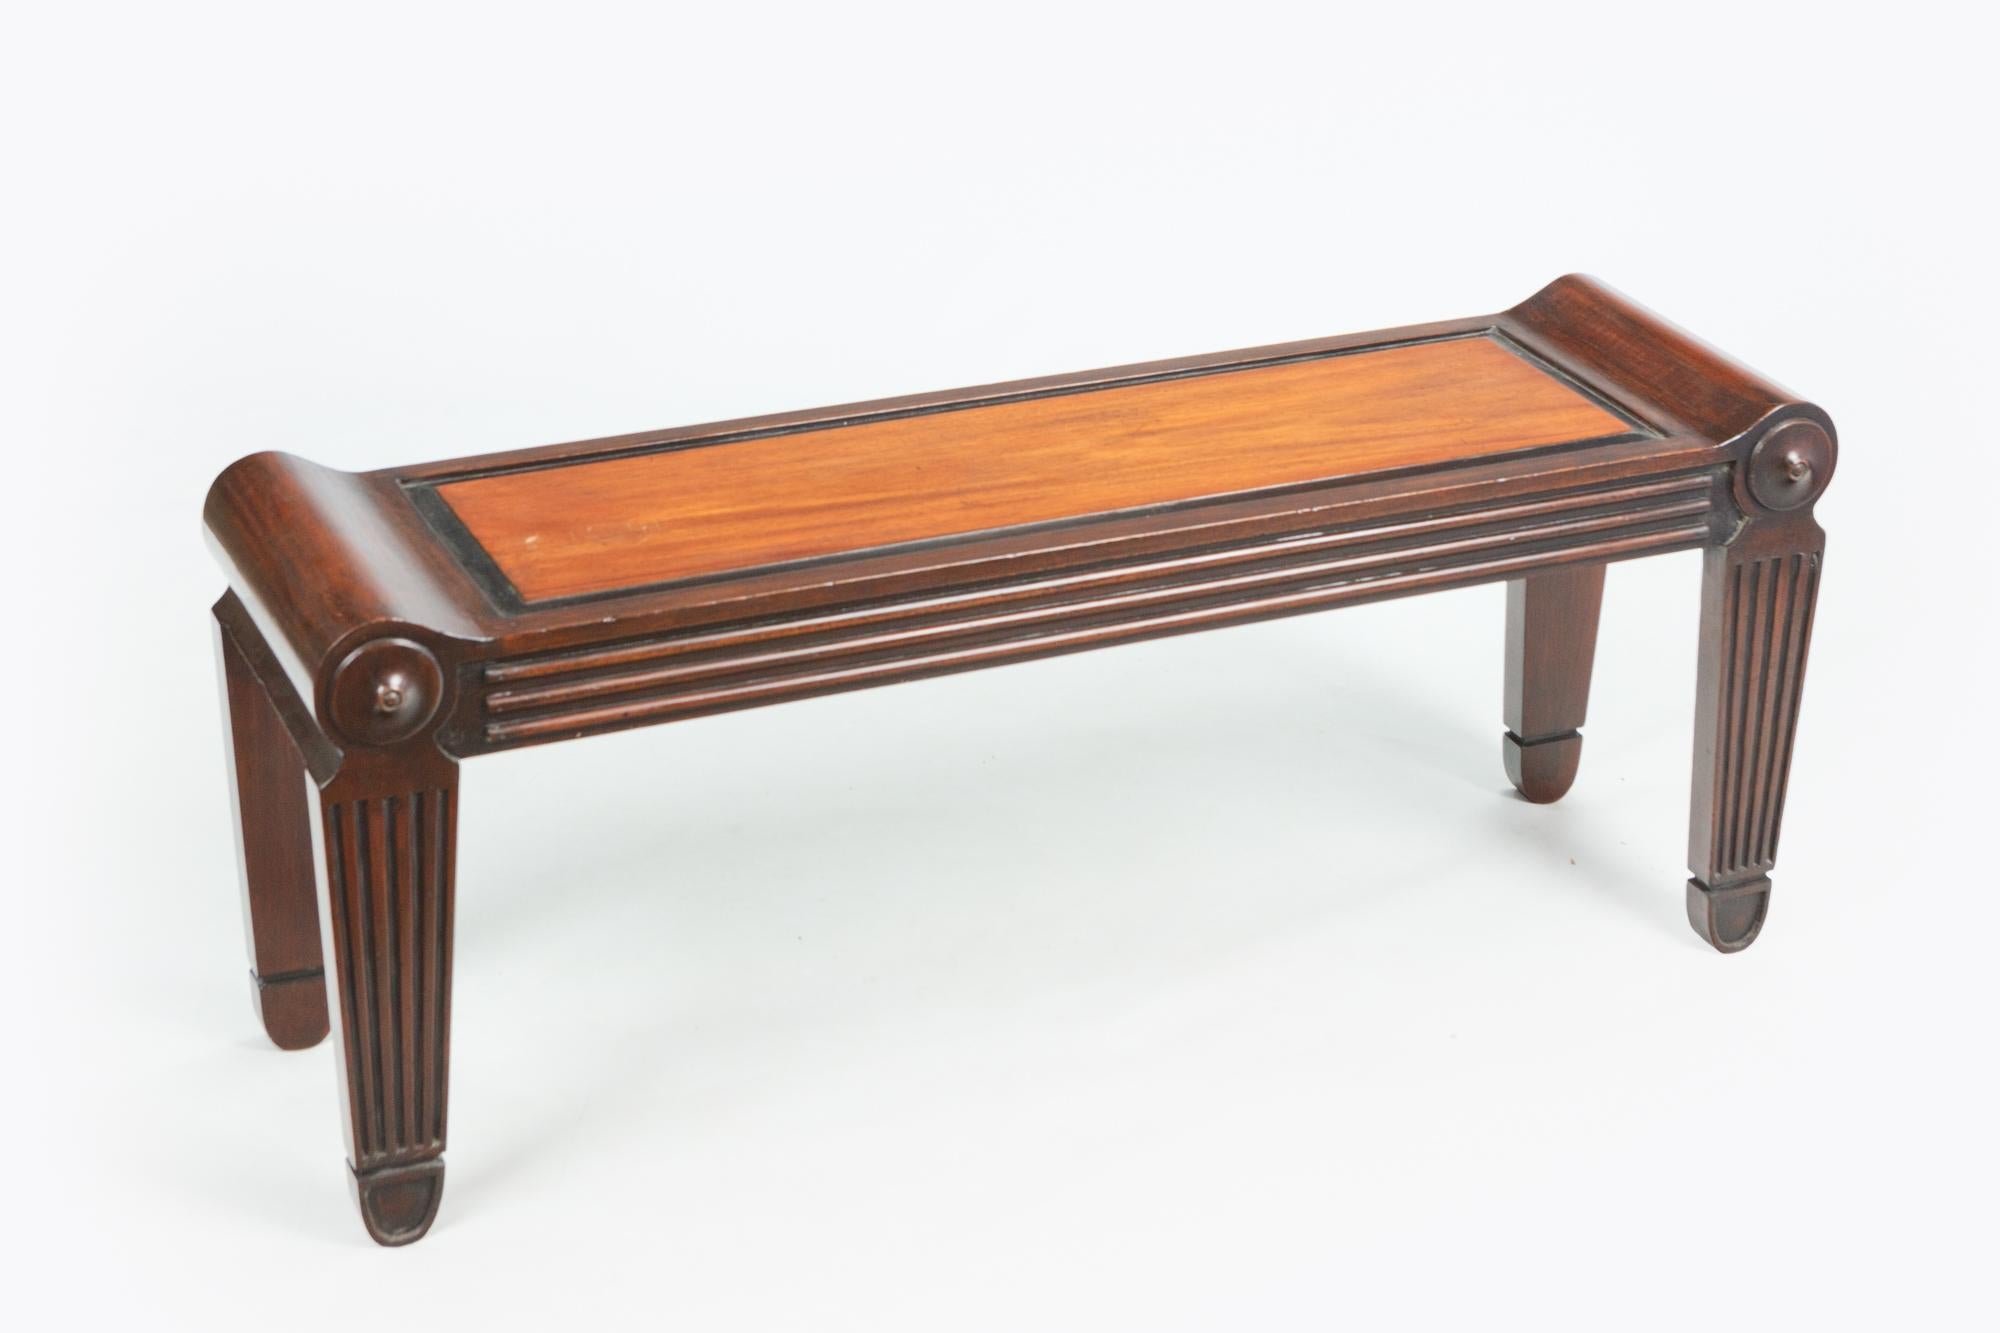 Inspired by a classical Roman marble seat, Charles Heathcote Tatham’s benches were distinguished by their fluted tapering legs, roundels, and paneled seats. This late 19th century pair of benches in the manner of Tatham adheres precisely to that